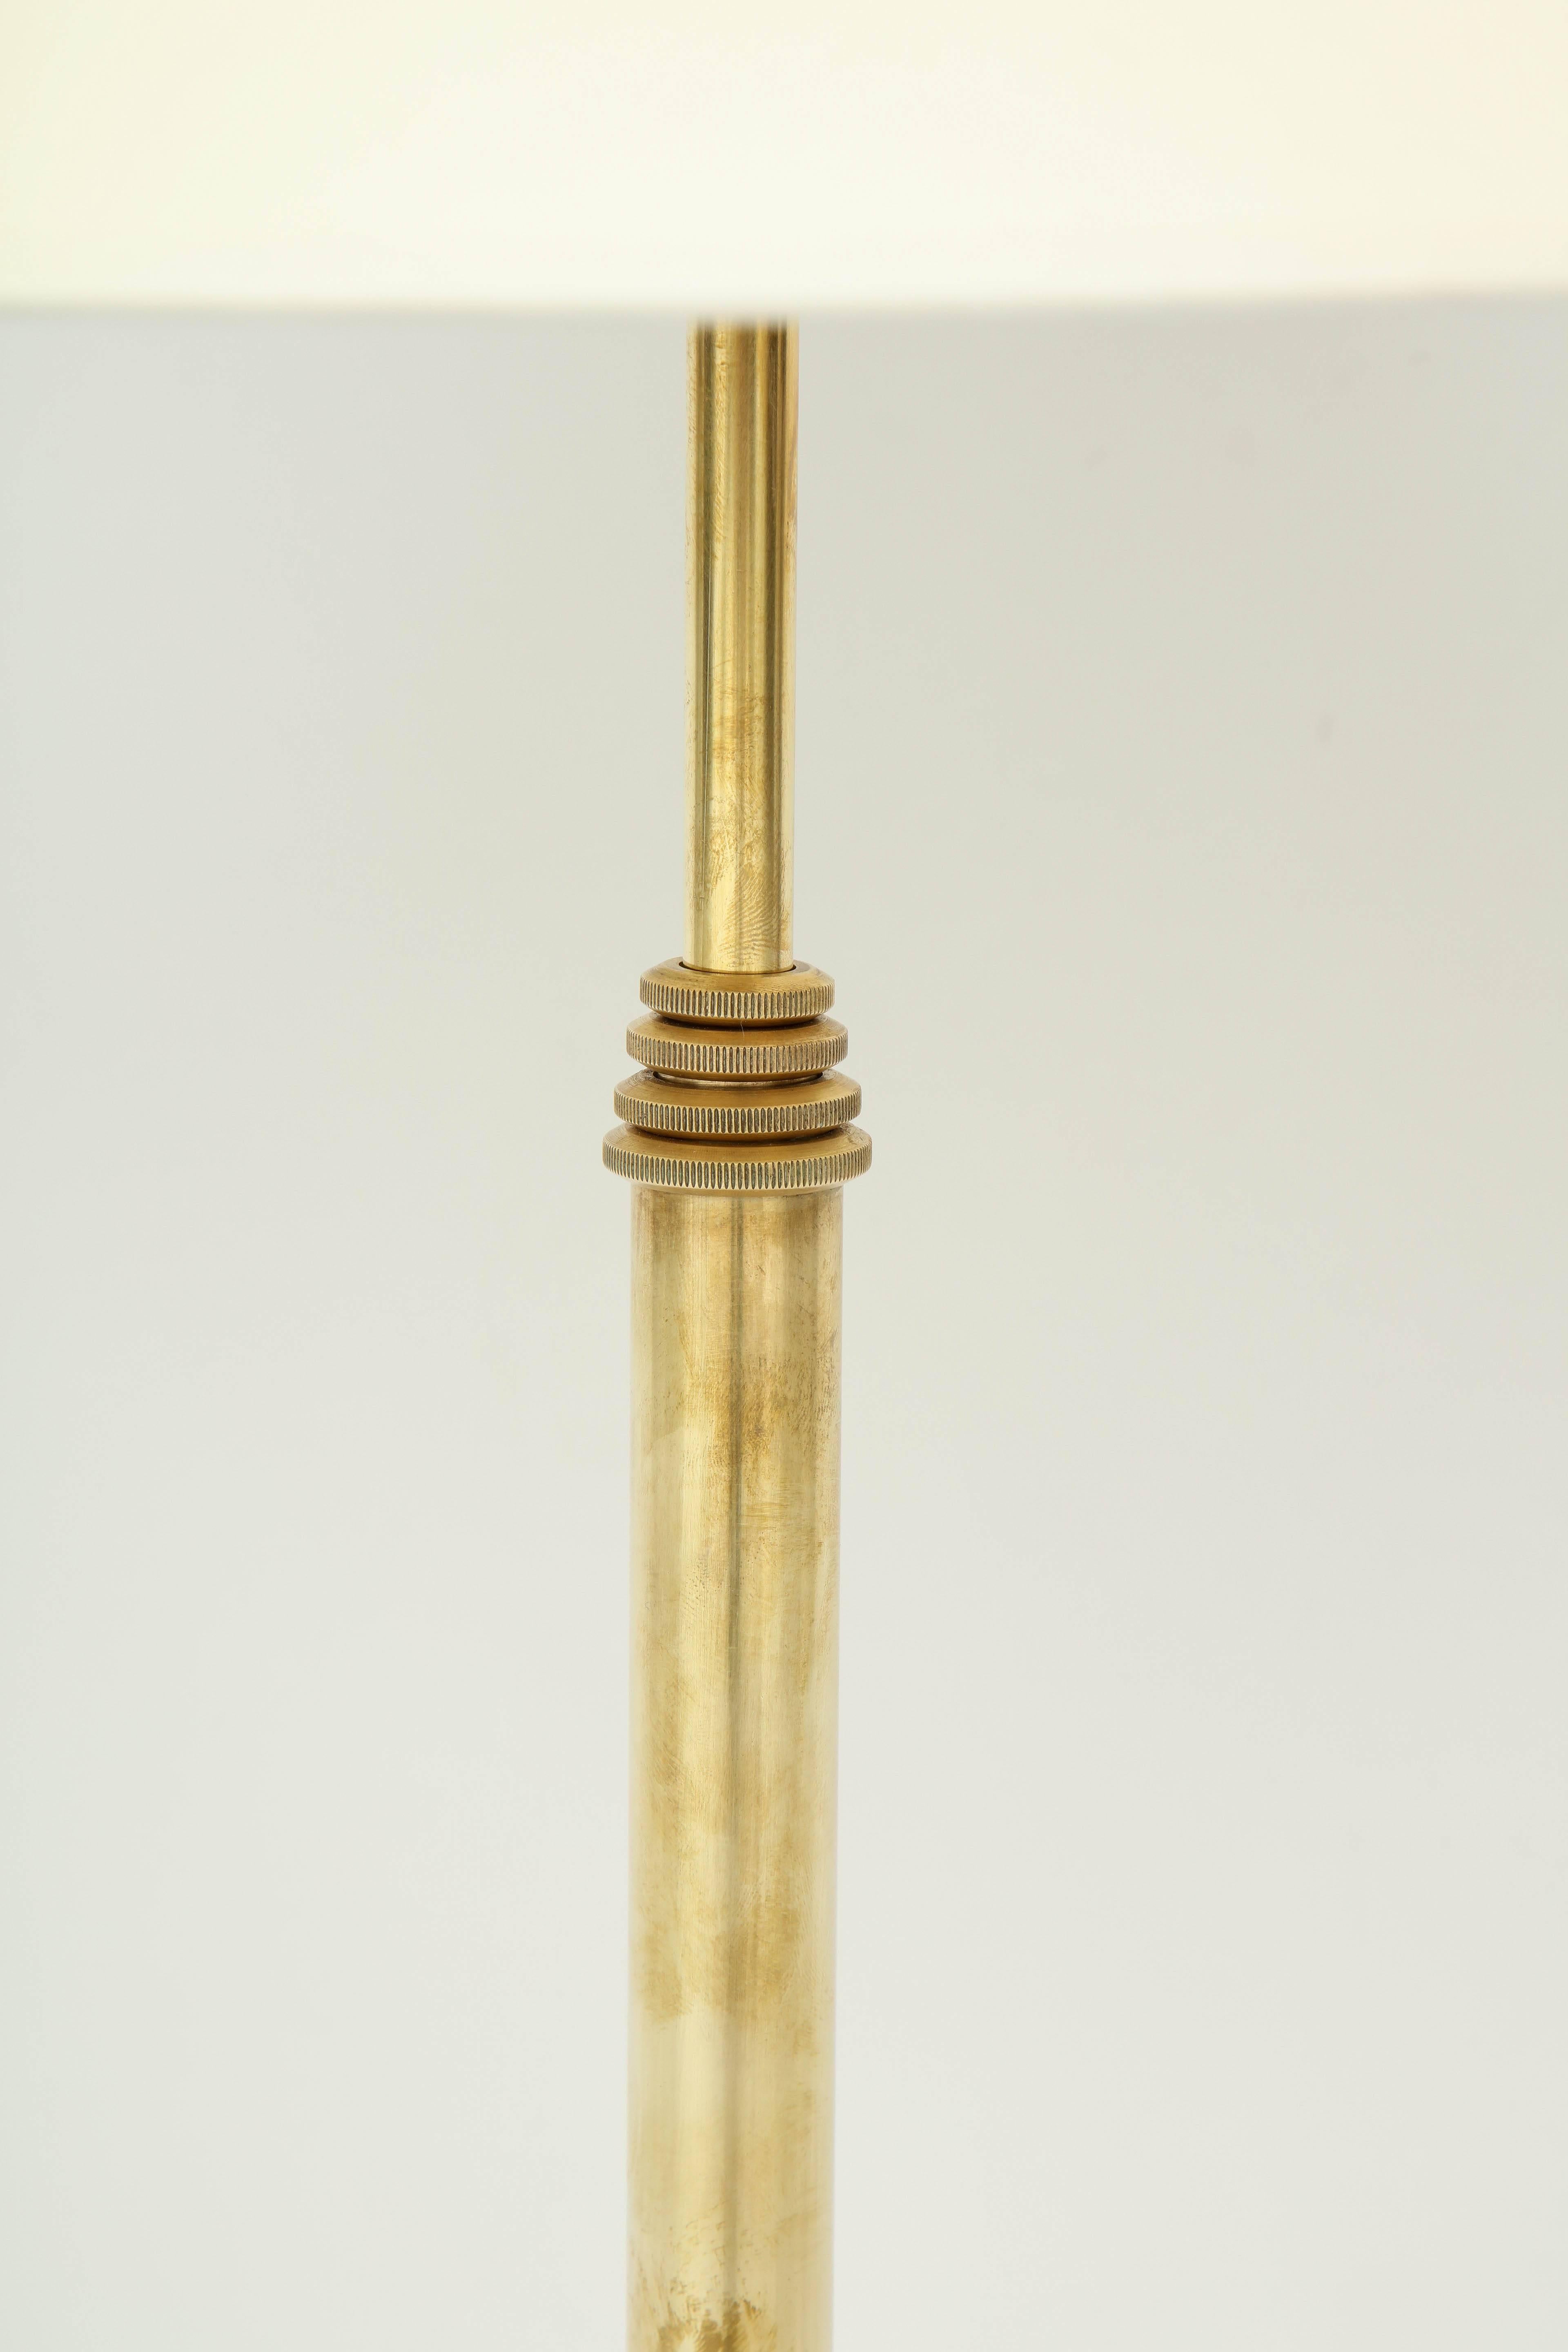 Danish Telescopic Brass Table or Floor Lamp, circa 1940s In Good Condition For Sale In New York, NY